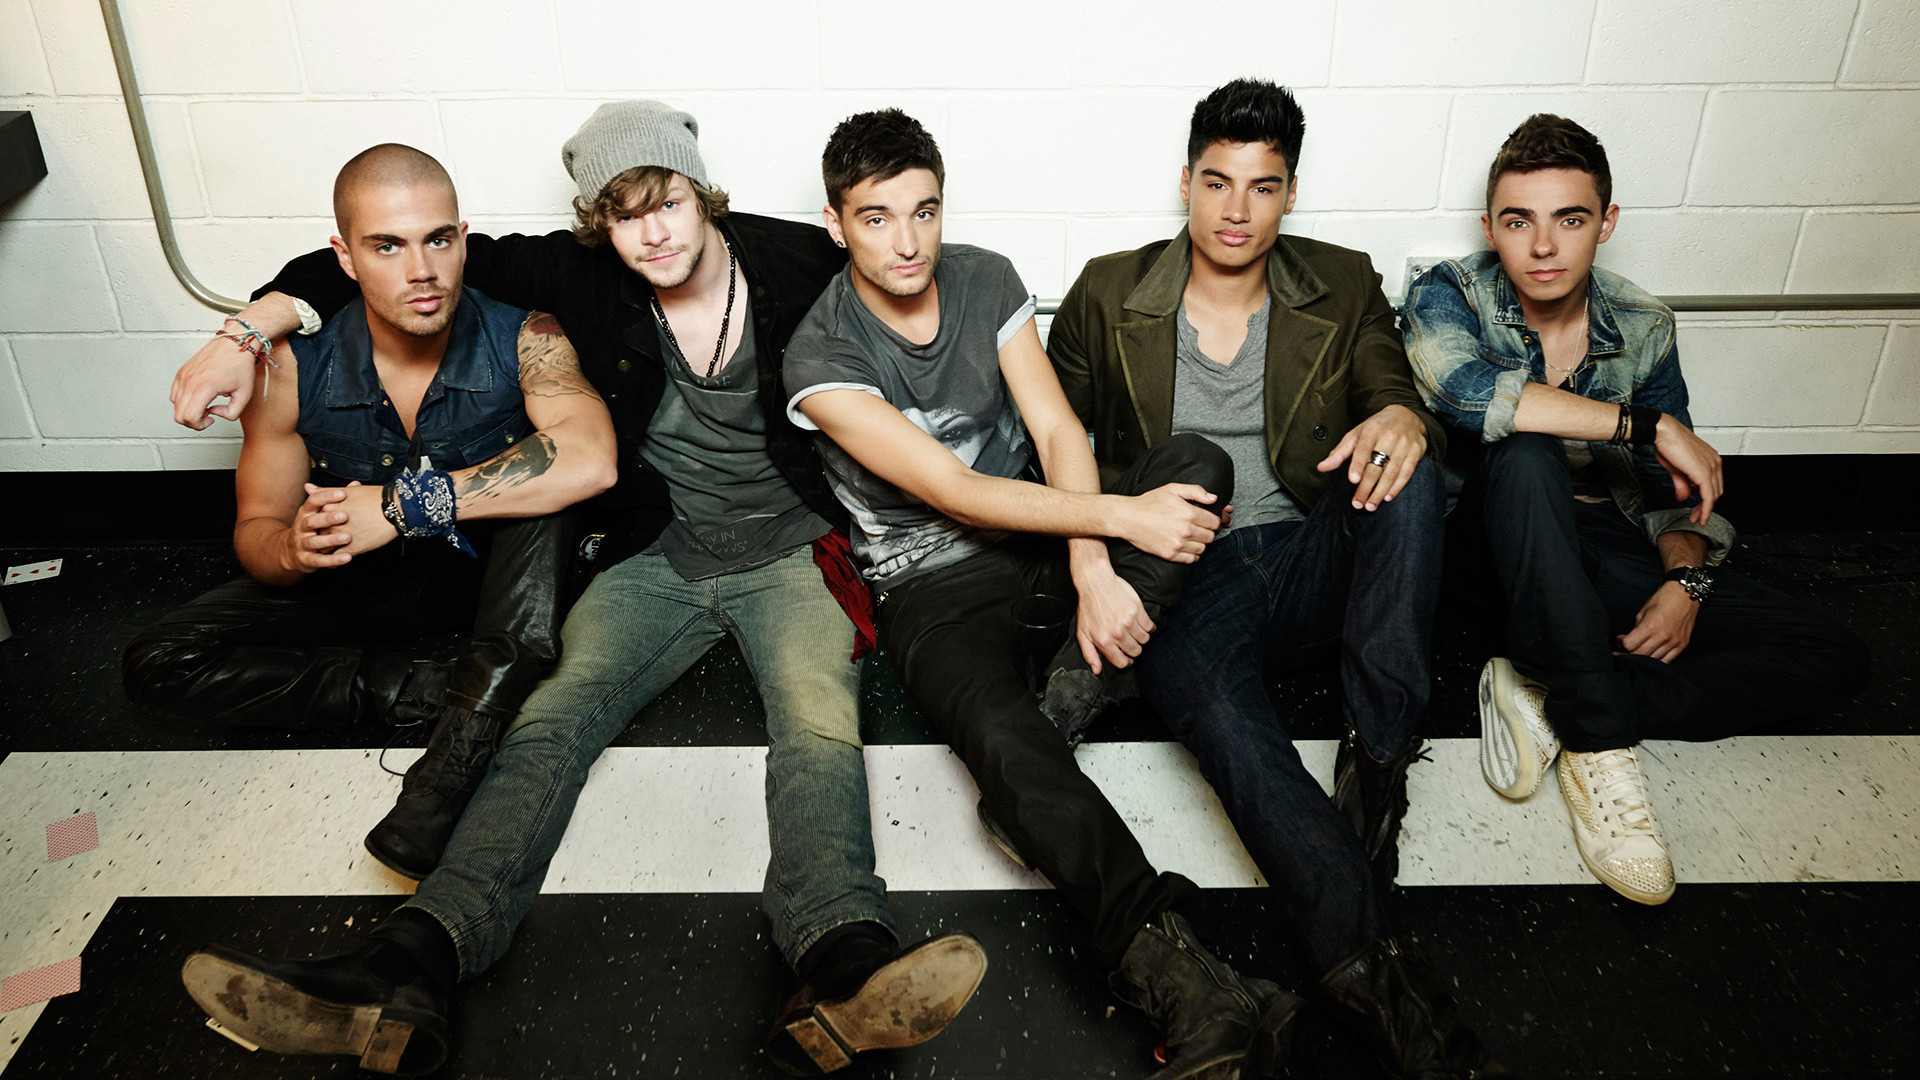 Show The Wanted Life